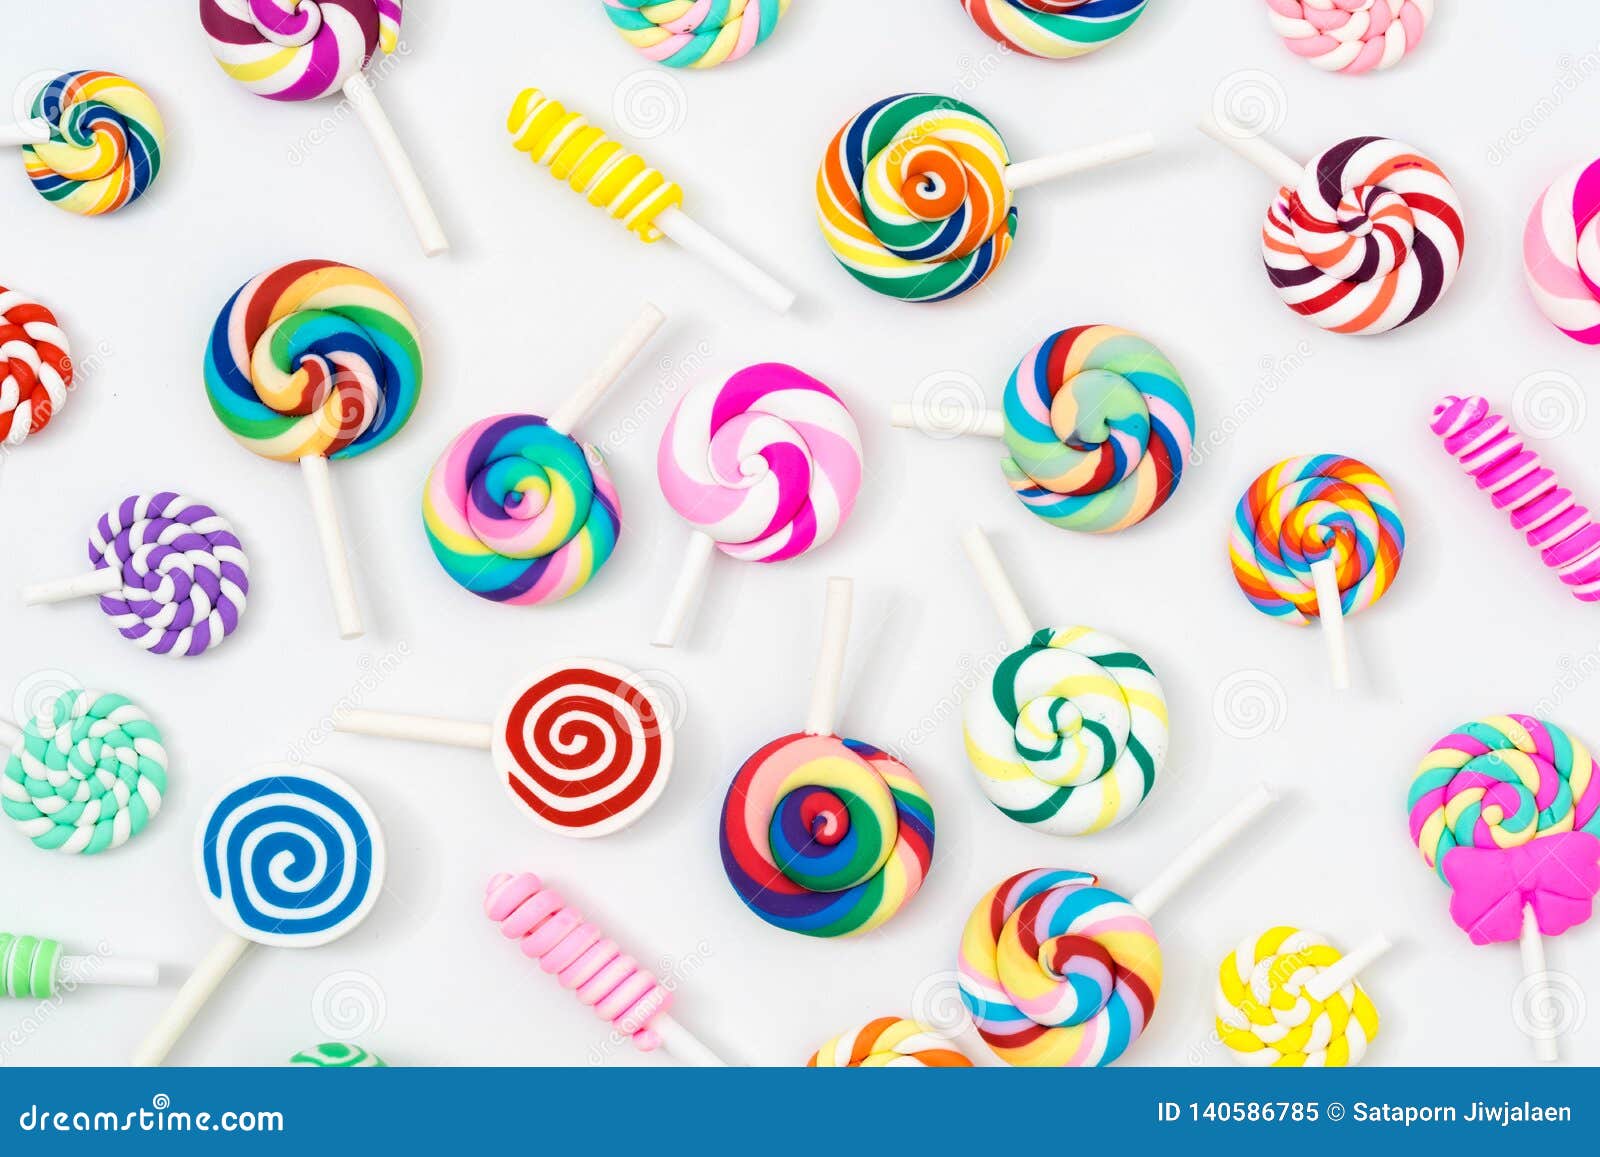 Colorful Lollipop and Different Colored Round Candy Stock Image - Image ...